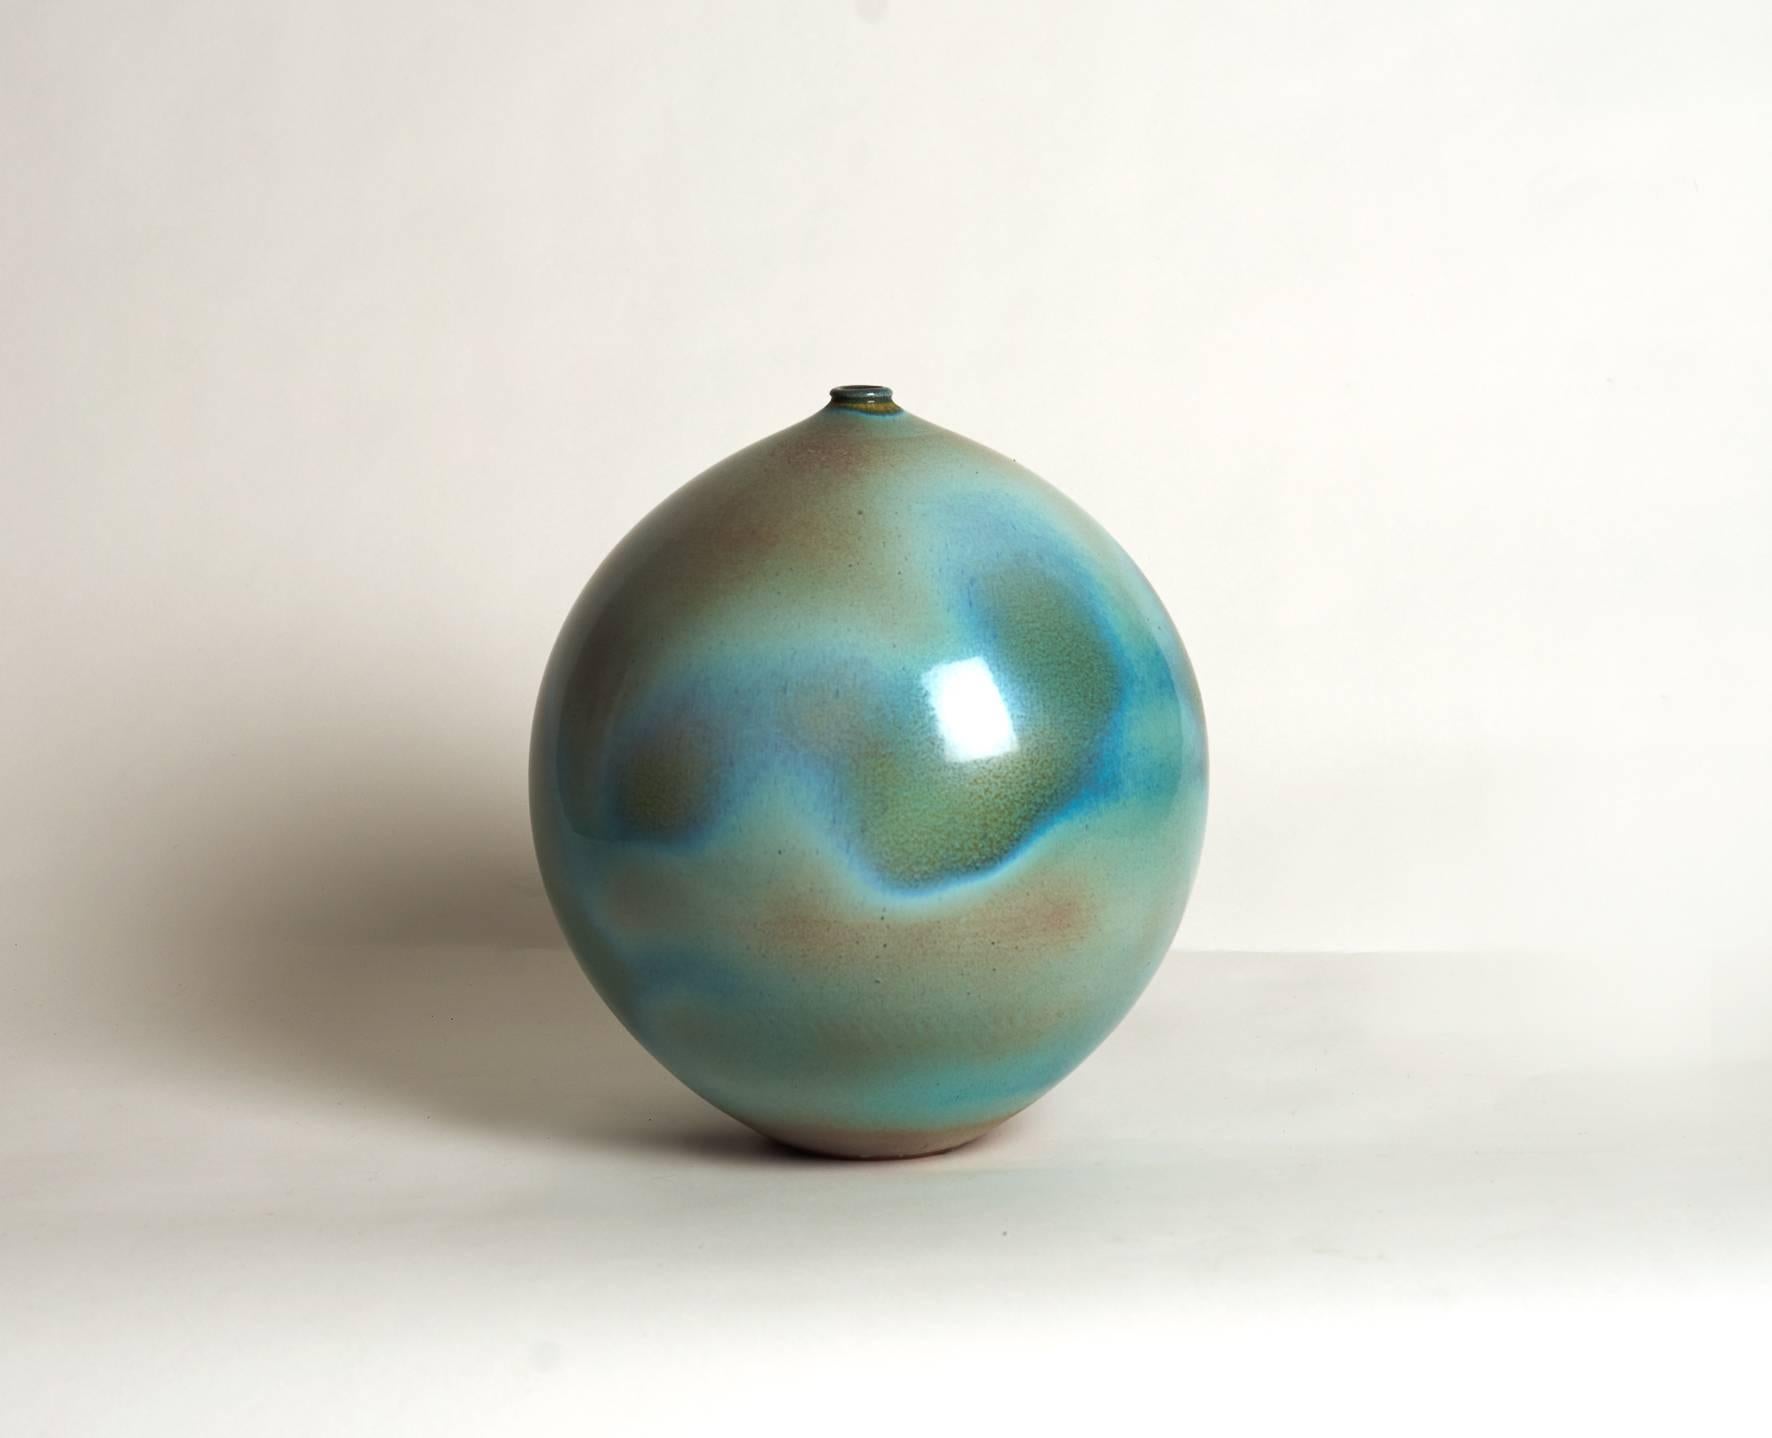 Suzanne Ramie (1907-1974), Vallauris, France

Ceramic vase by renowned French artist Suzanne Ramié having an amazing green/blue/turquoise glaze.
Incised on the bottom with the artist stamp mark 